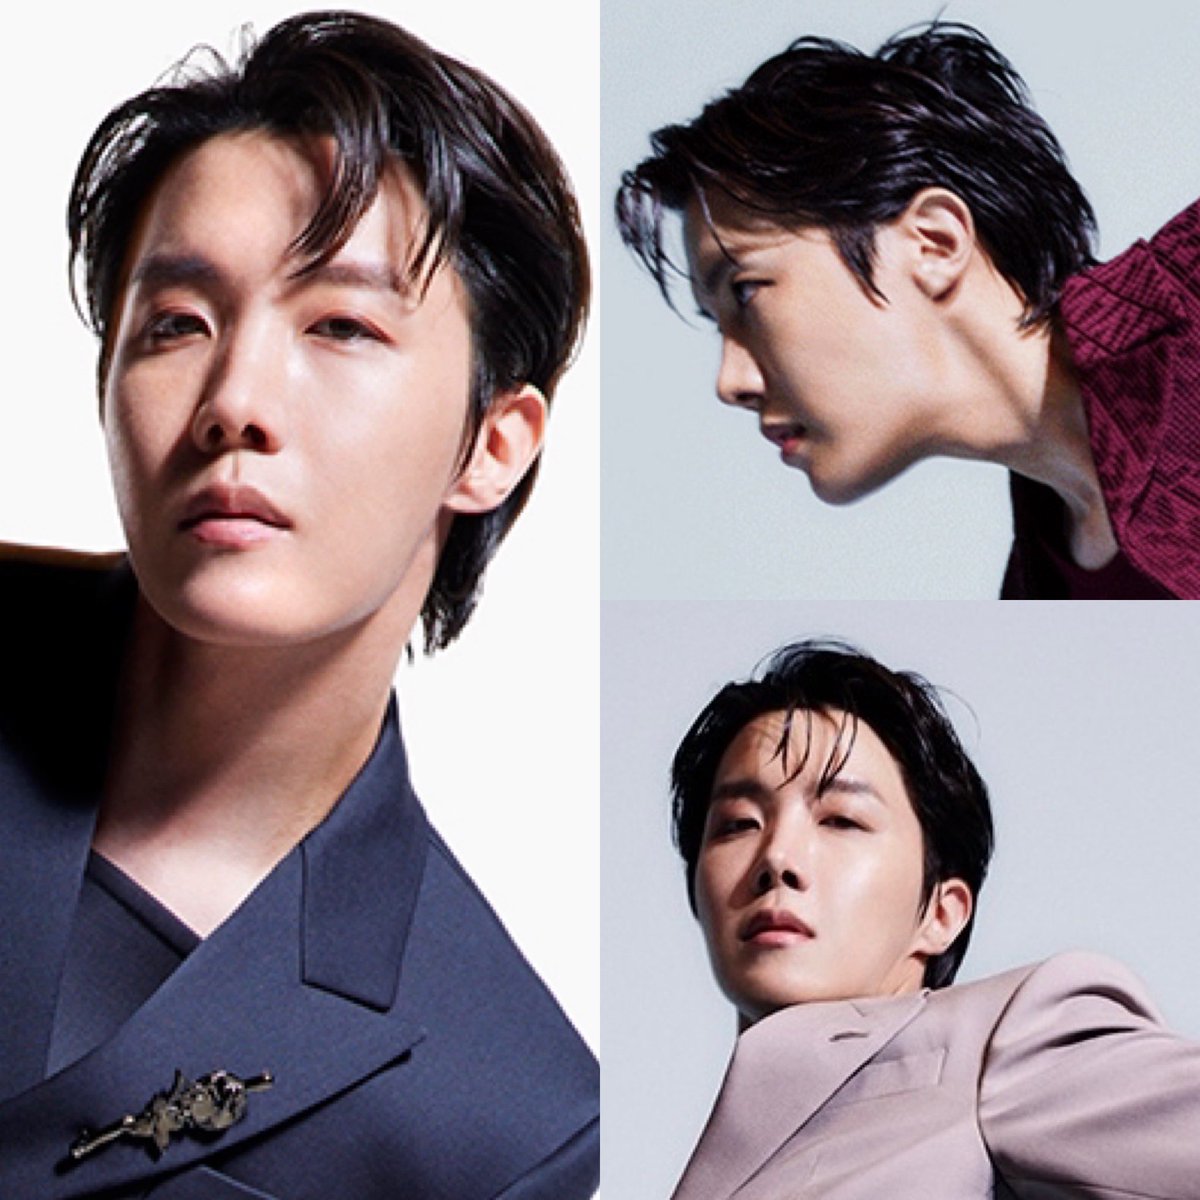 Everyone’s talking about his dynamic poses (and for good reason) but allow me to direct your attention to THE FACE. Who can strike those poses and look this gorgeous, cool and calm?

Only j-hope. 💖

J-HOPE x LOUIS VUITTON
J-HOPE FASHION KING
J-HOPE MVP OF FASHION…